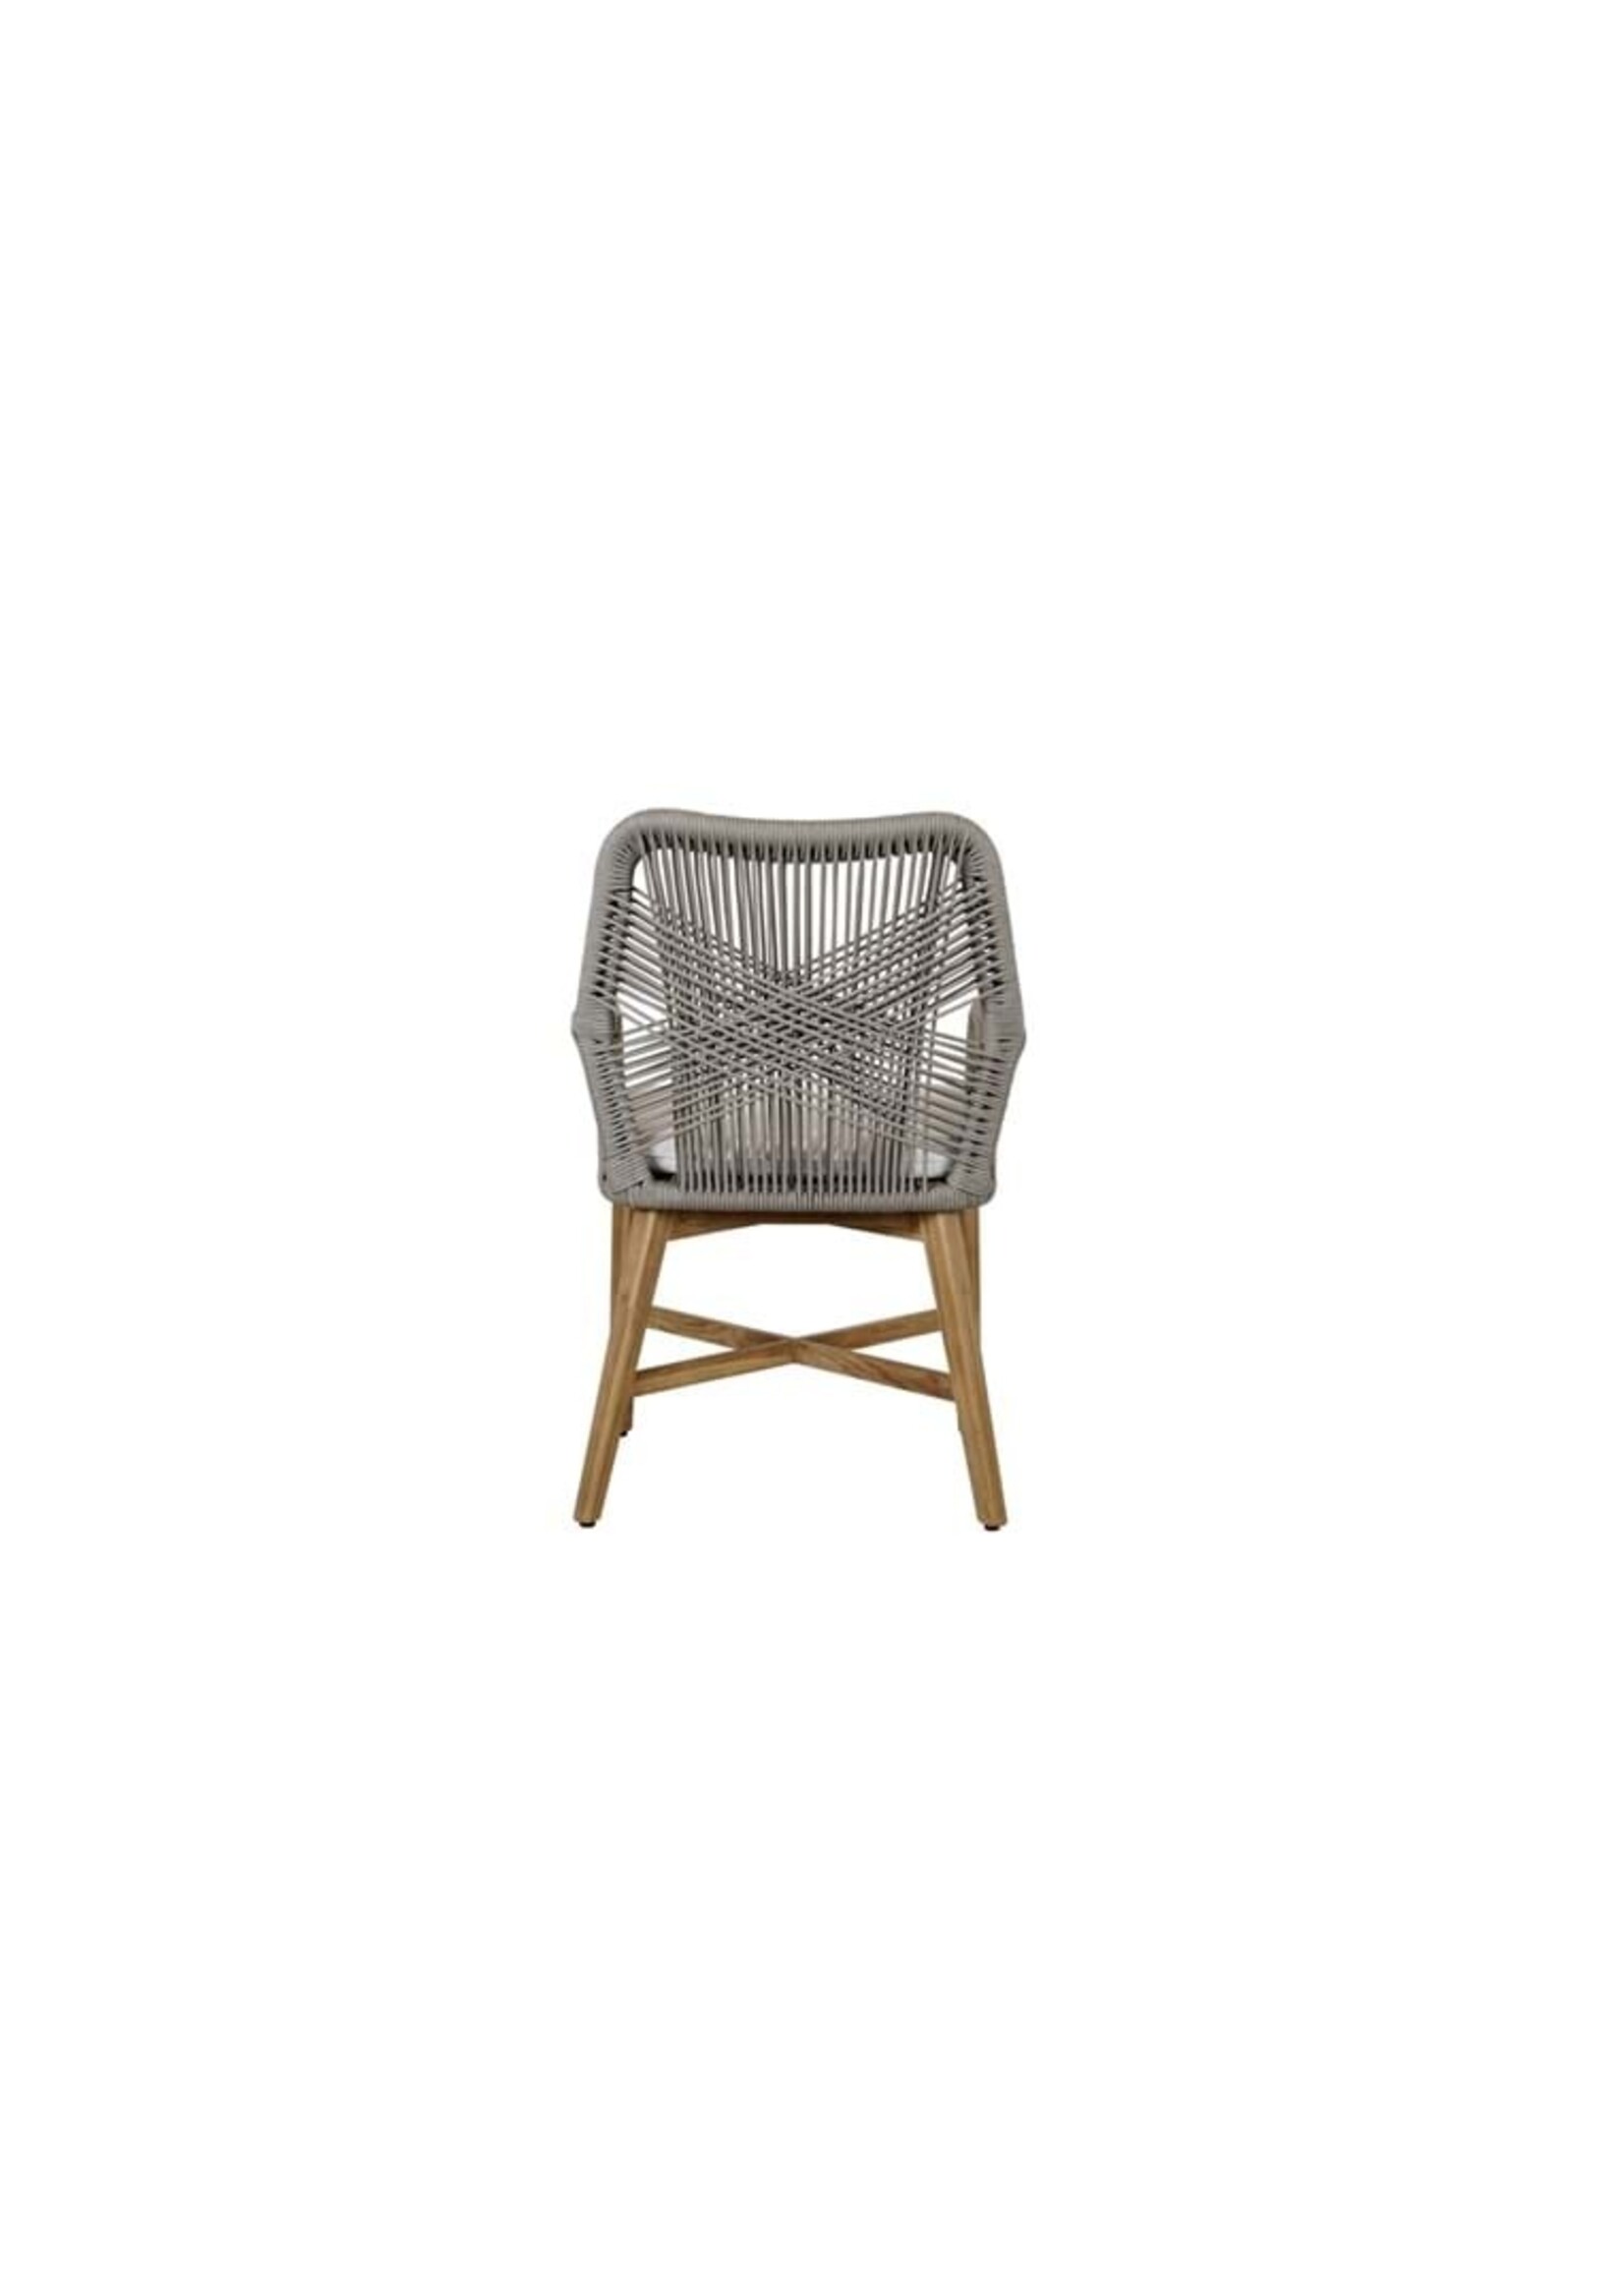 Marley Outdoor Dining Chair